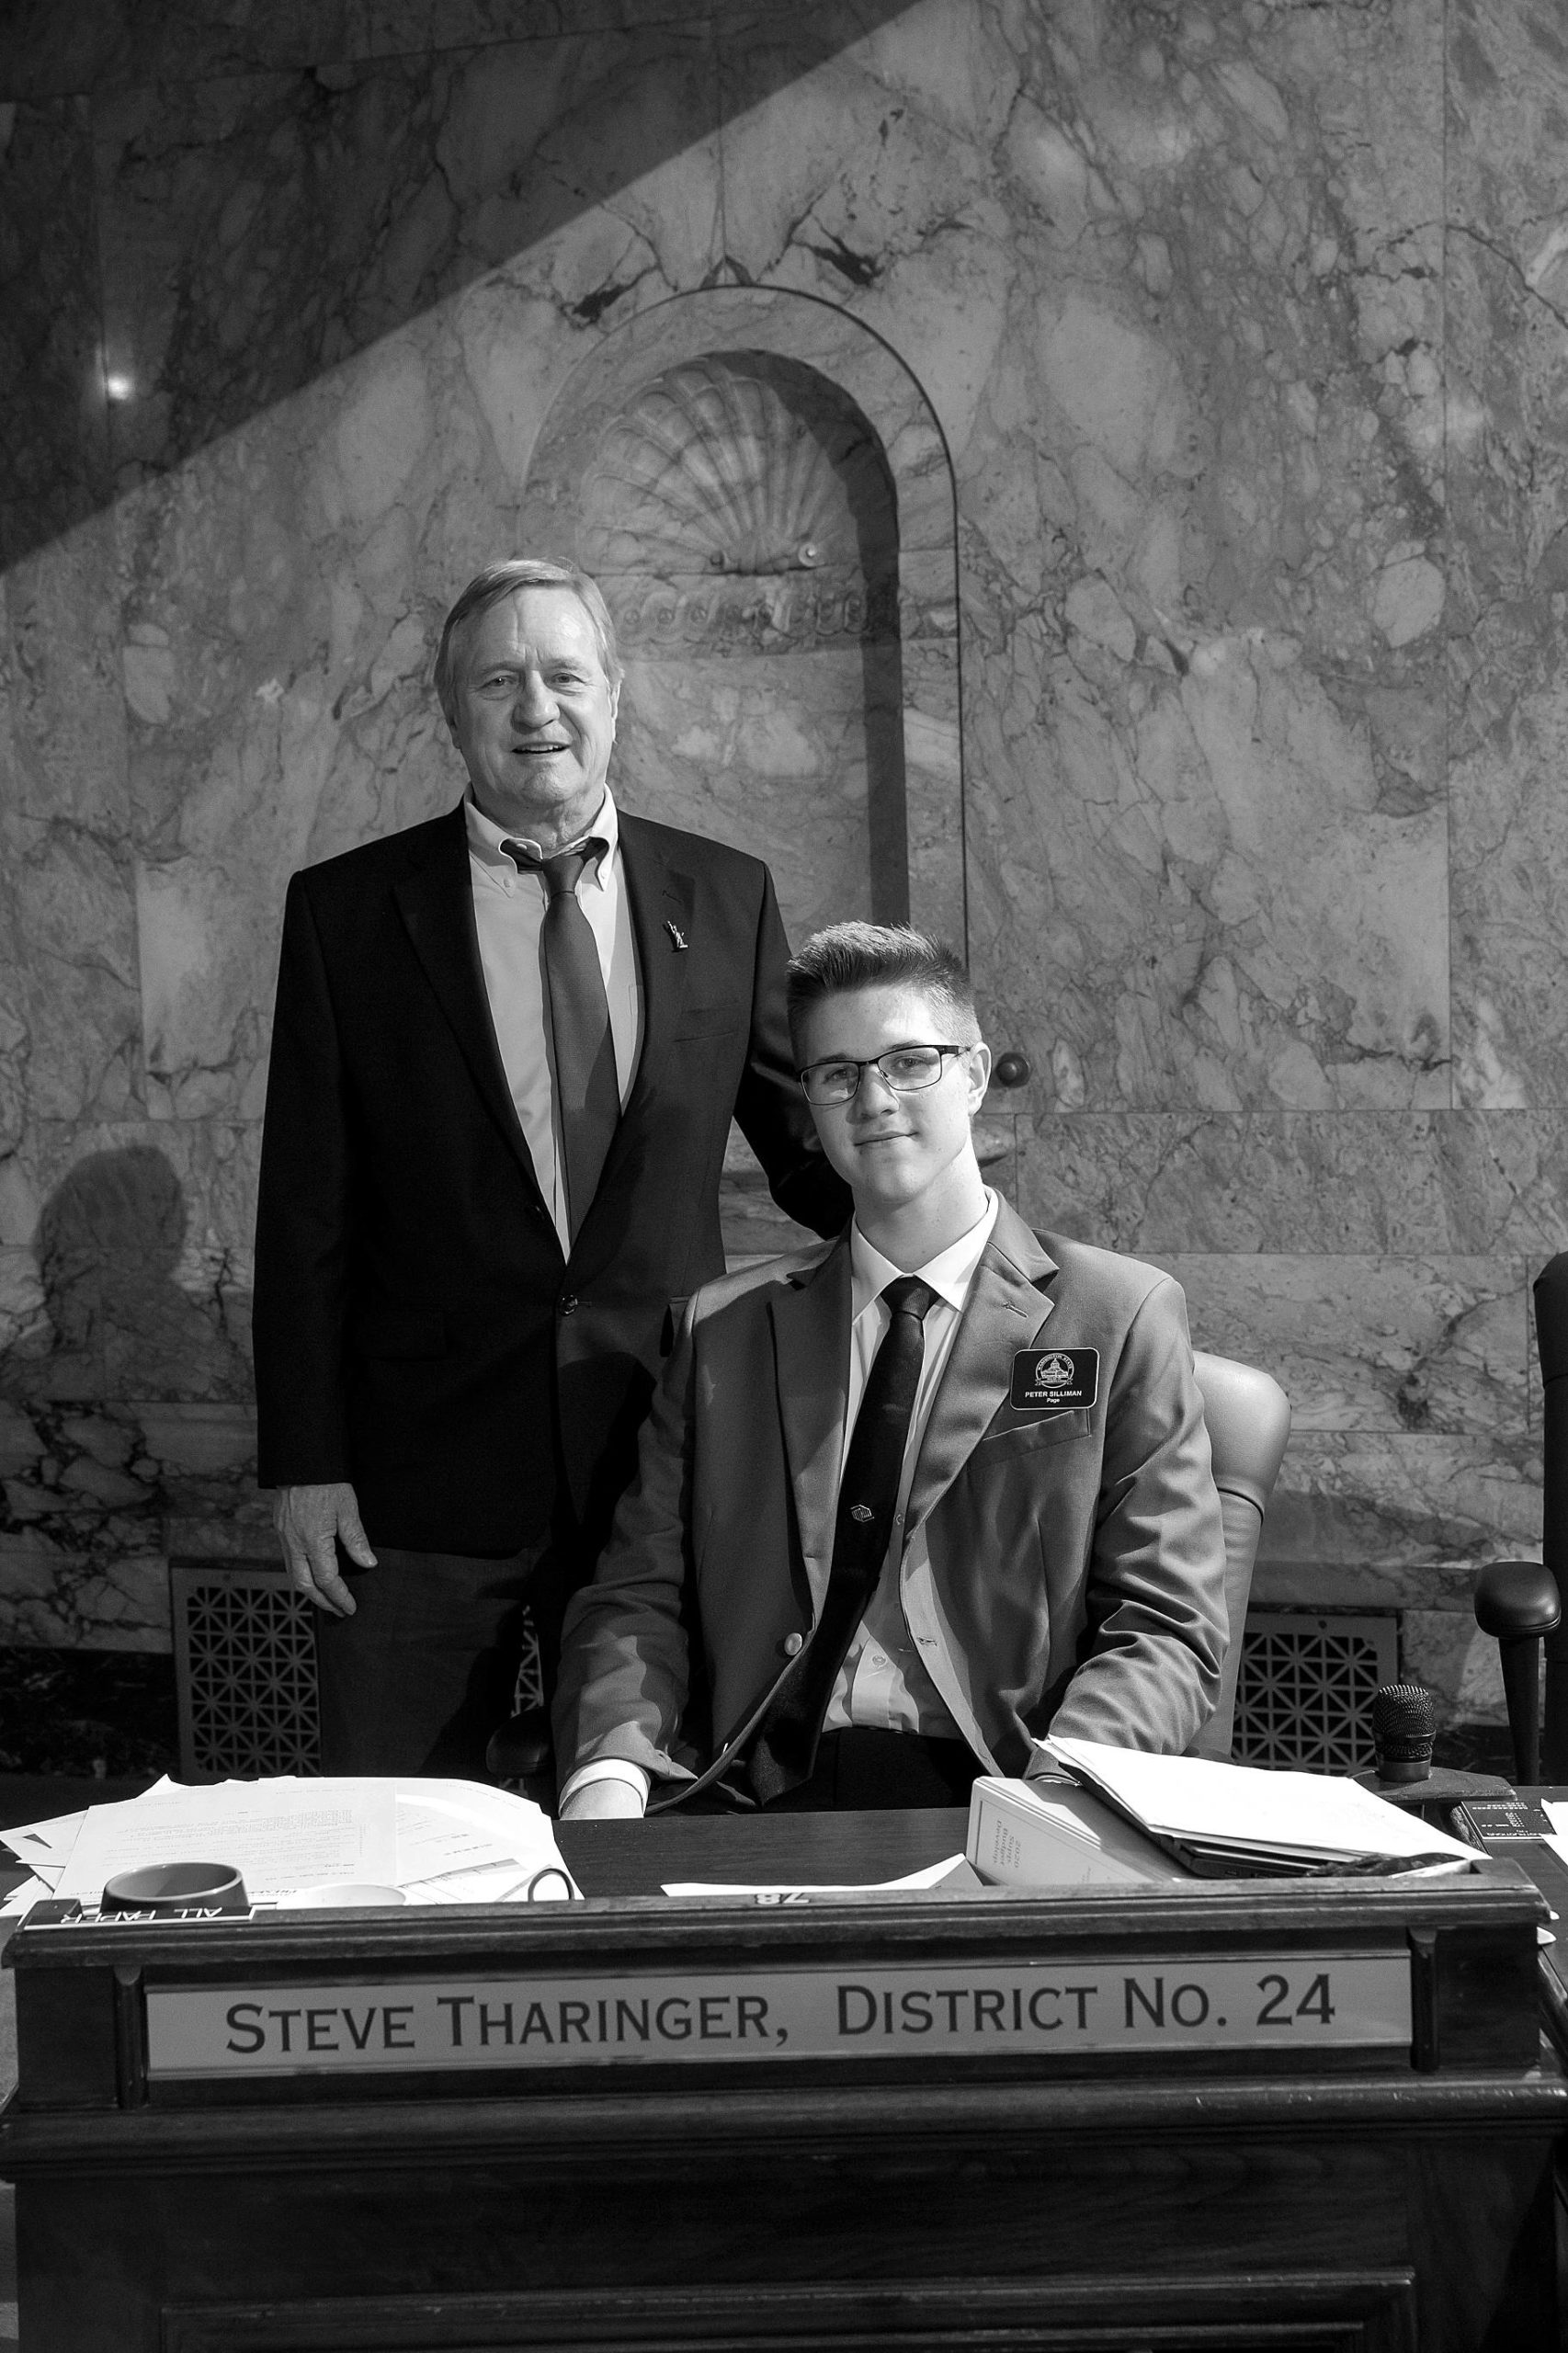 Sequim High School junior Peter Silliman serves as a page this week in the Washington State House of Representatives last week. Sponsored by Rep. Steve Tharinger (D-Port Townsend), Silliman is the son of Cliff Silliman of Sequim. Pages assume a wide variety of responsibilities from presenting the flags to distributing amendments on the House floor. They also receive daily civics instruction, drafting their own bills and participating in mock committee hearings. Photo courtesy of Washington State Legislative Support Services